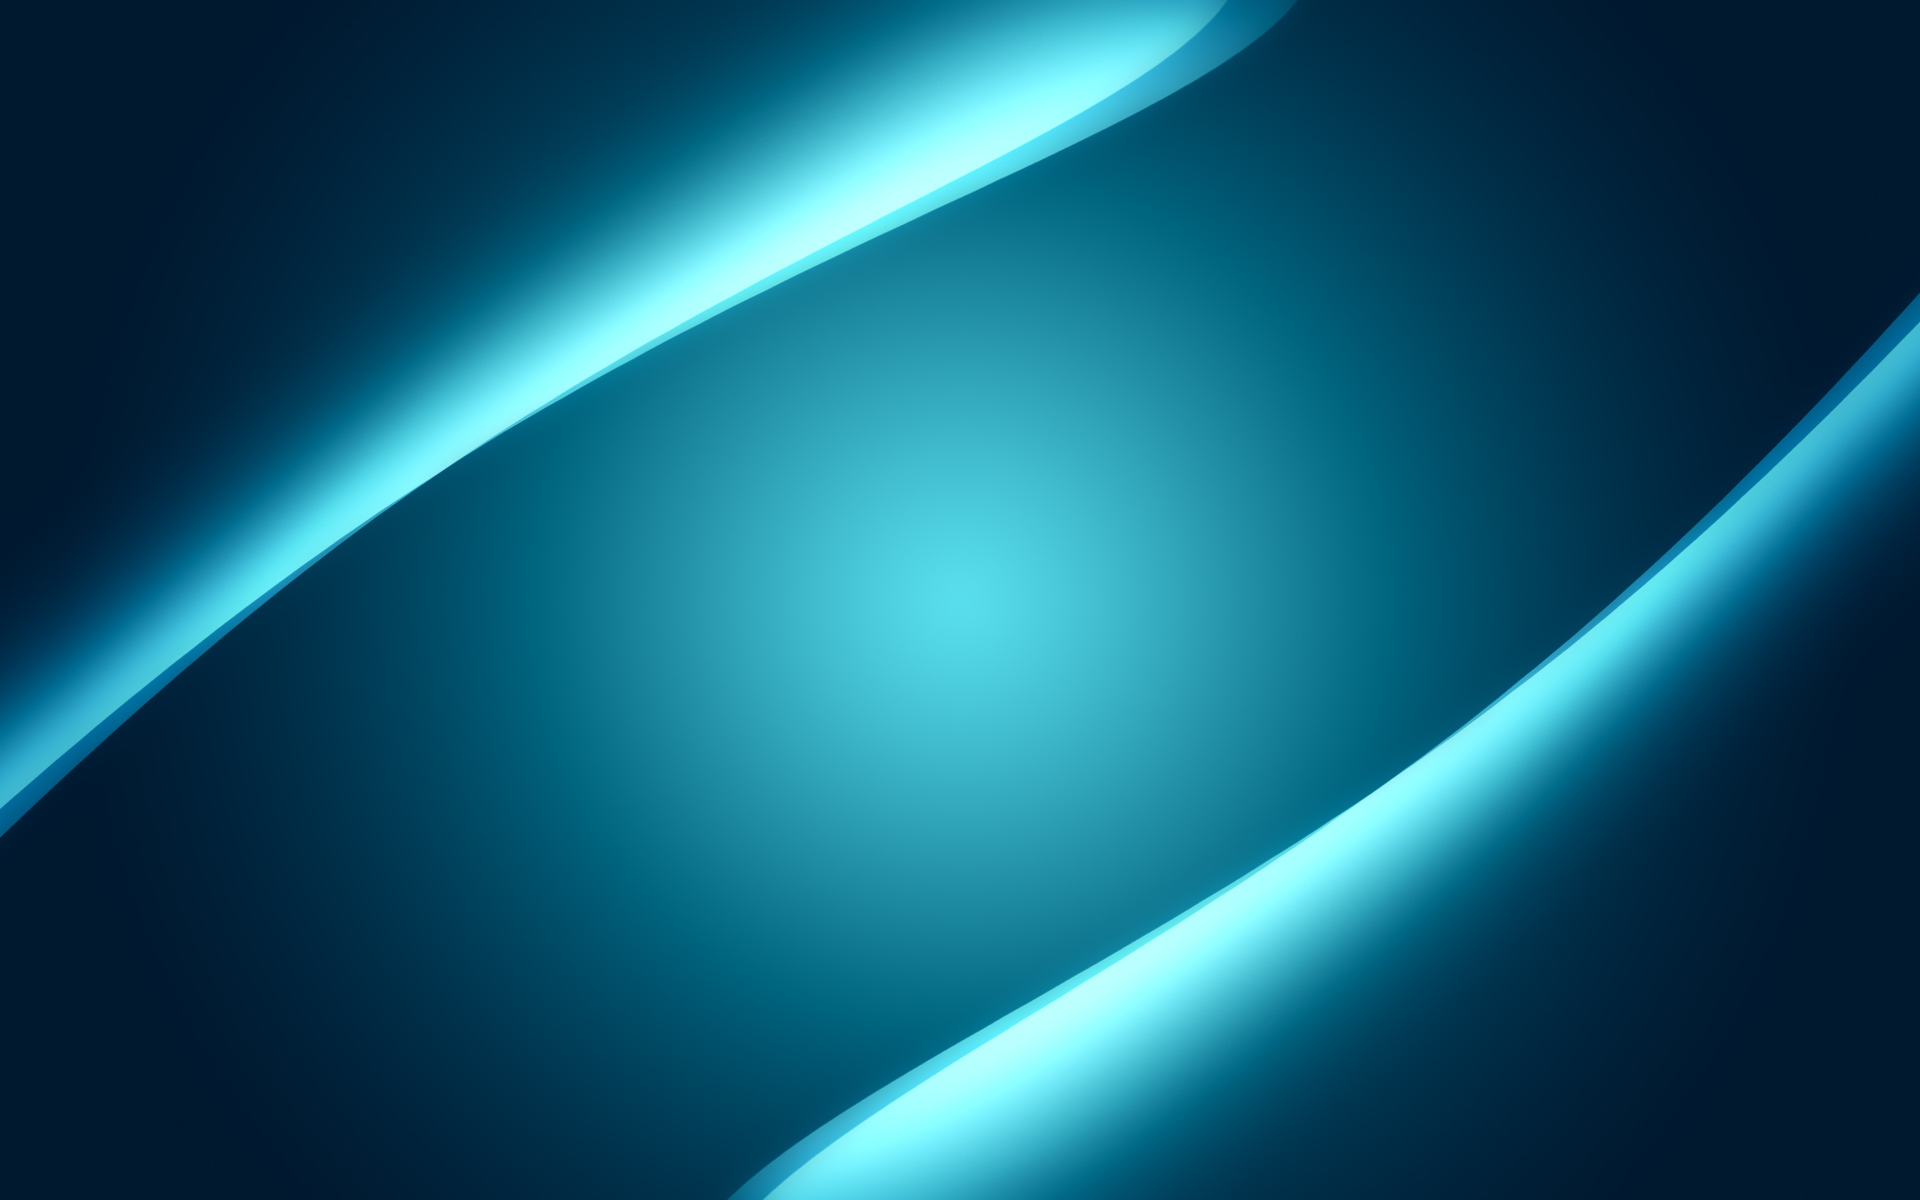 Neon blue wavy lines on a blue background